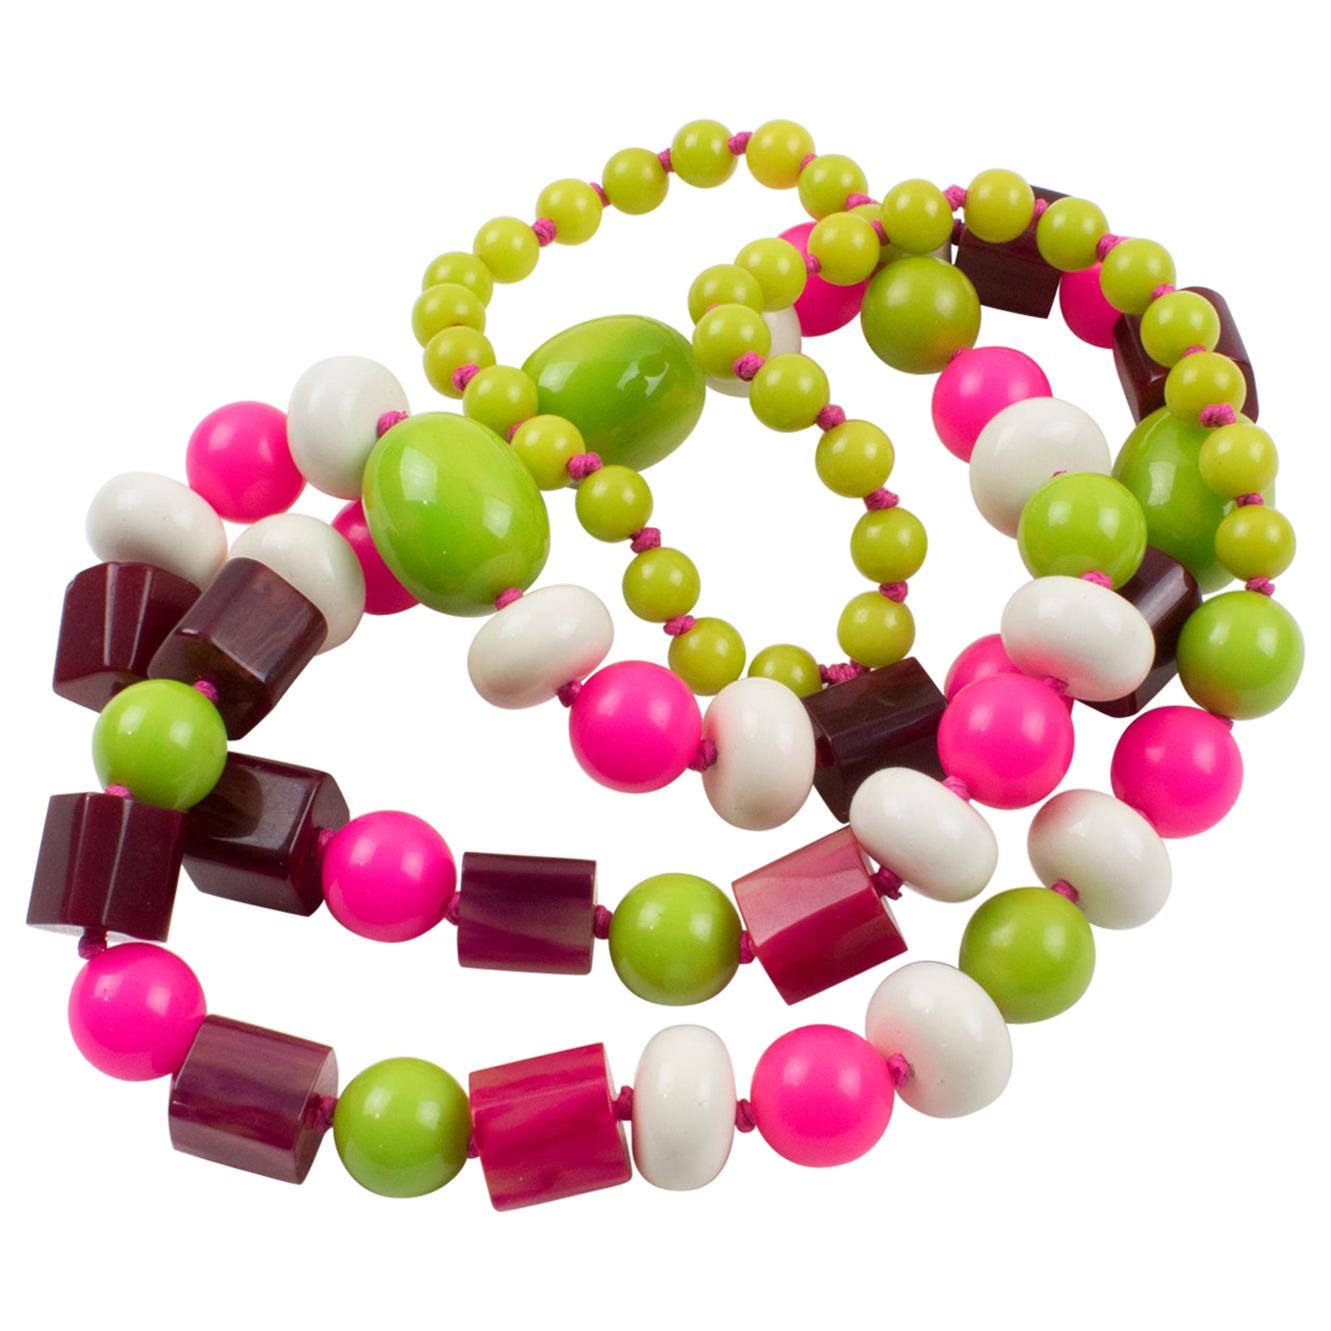 Bakelite and Lucite Long Necklace White, Hot Pink, Apple Green Beads